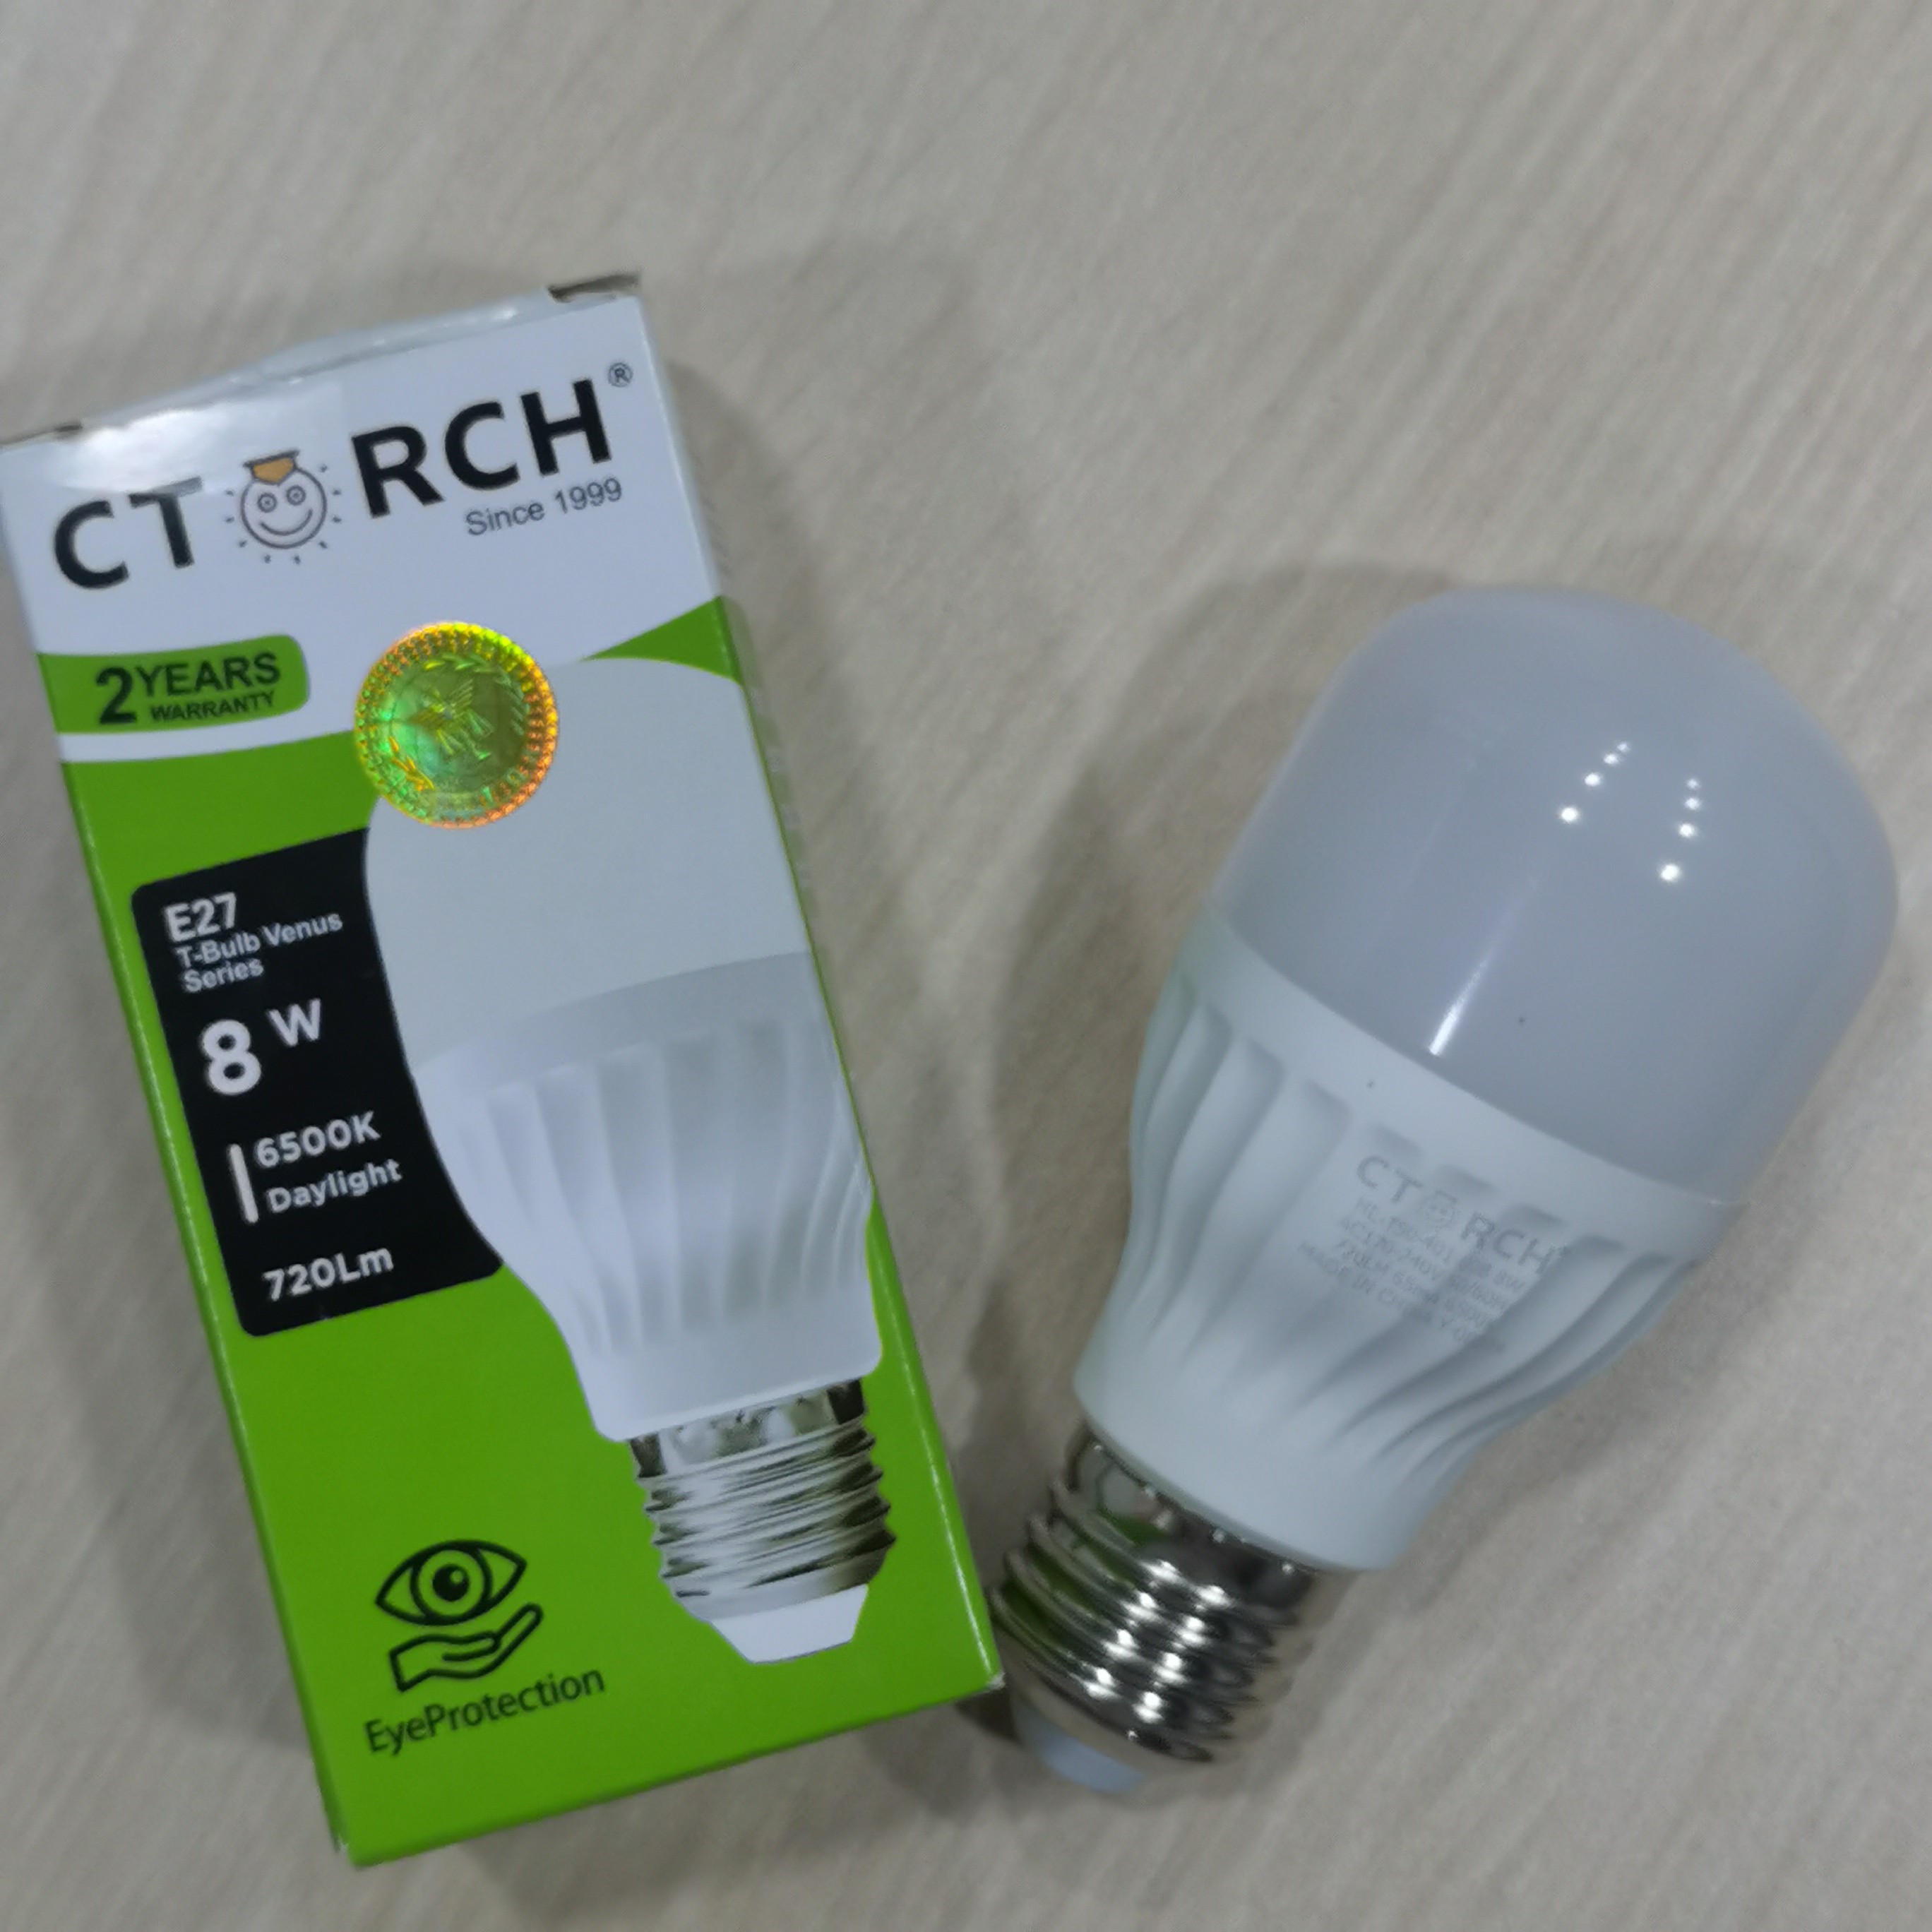 CTORCH high quality chips 2 Years warranty indoor Aluminum T Shape Bulb with 8w 15w 18w 24w 35w 450w 55w E27 B22 led light bulb